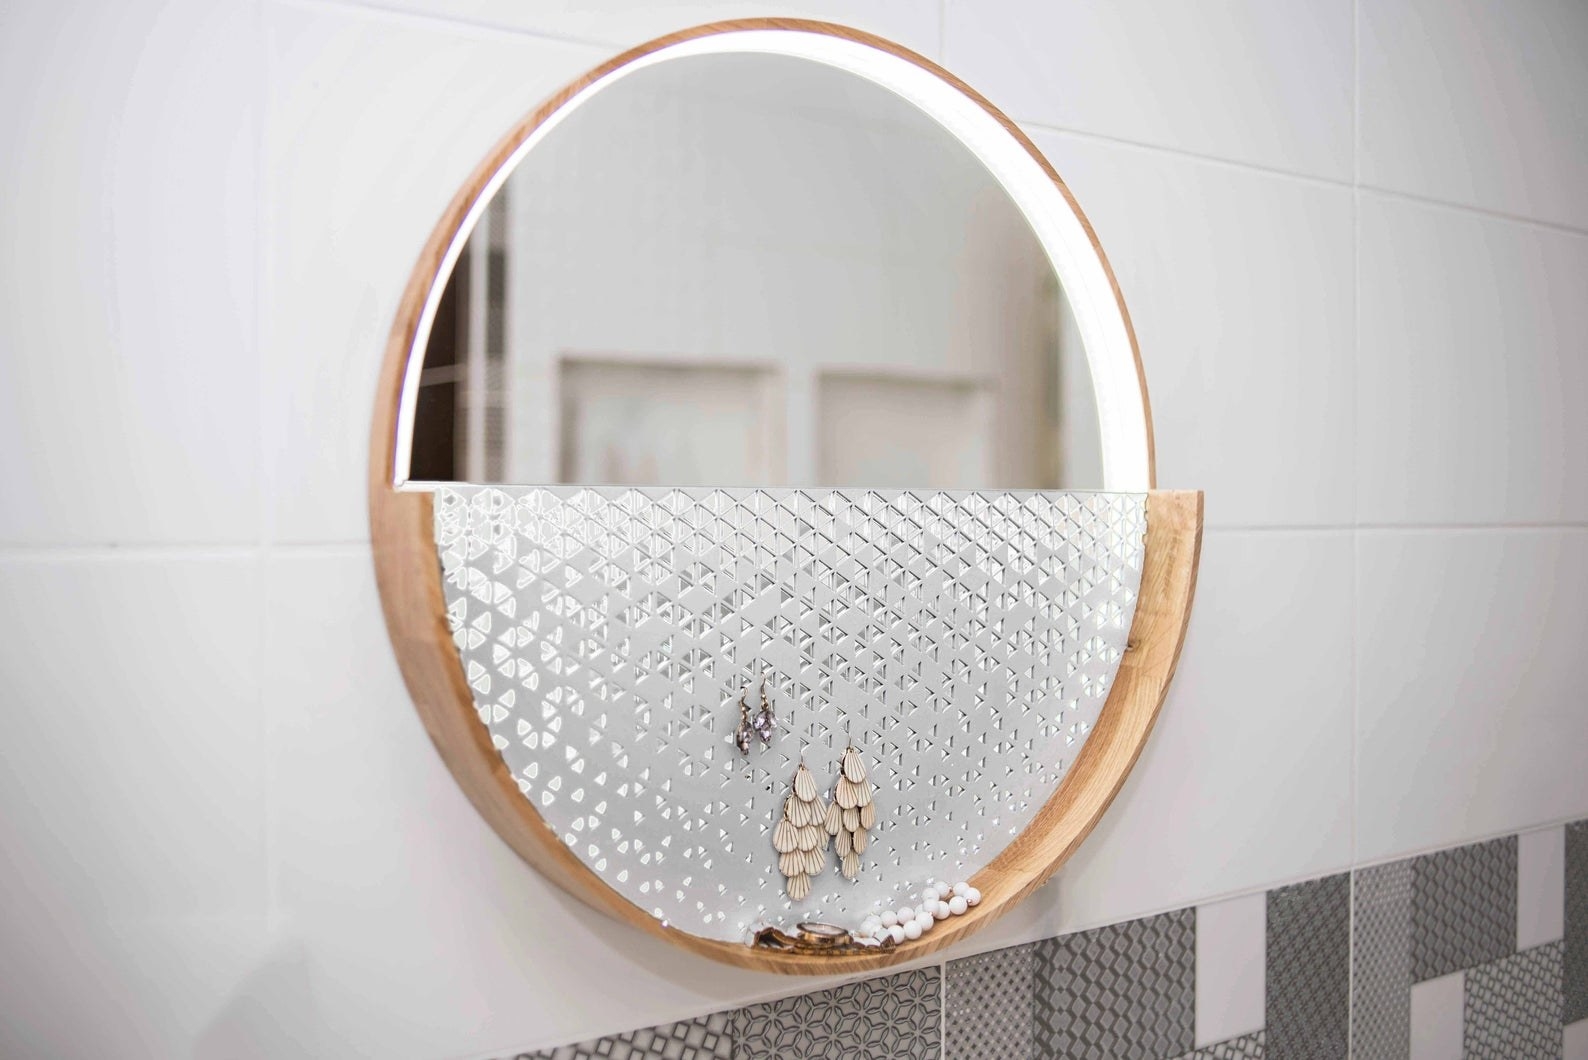 A round mirror with wood frame, lights in between the mirror and frame and a white holder on the bottom half with earrings hanging from it